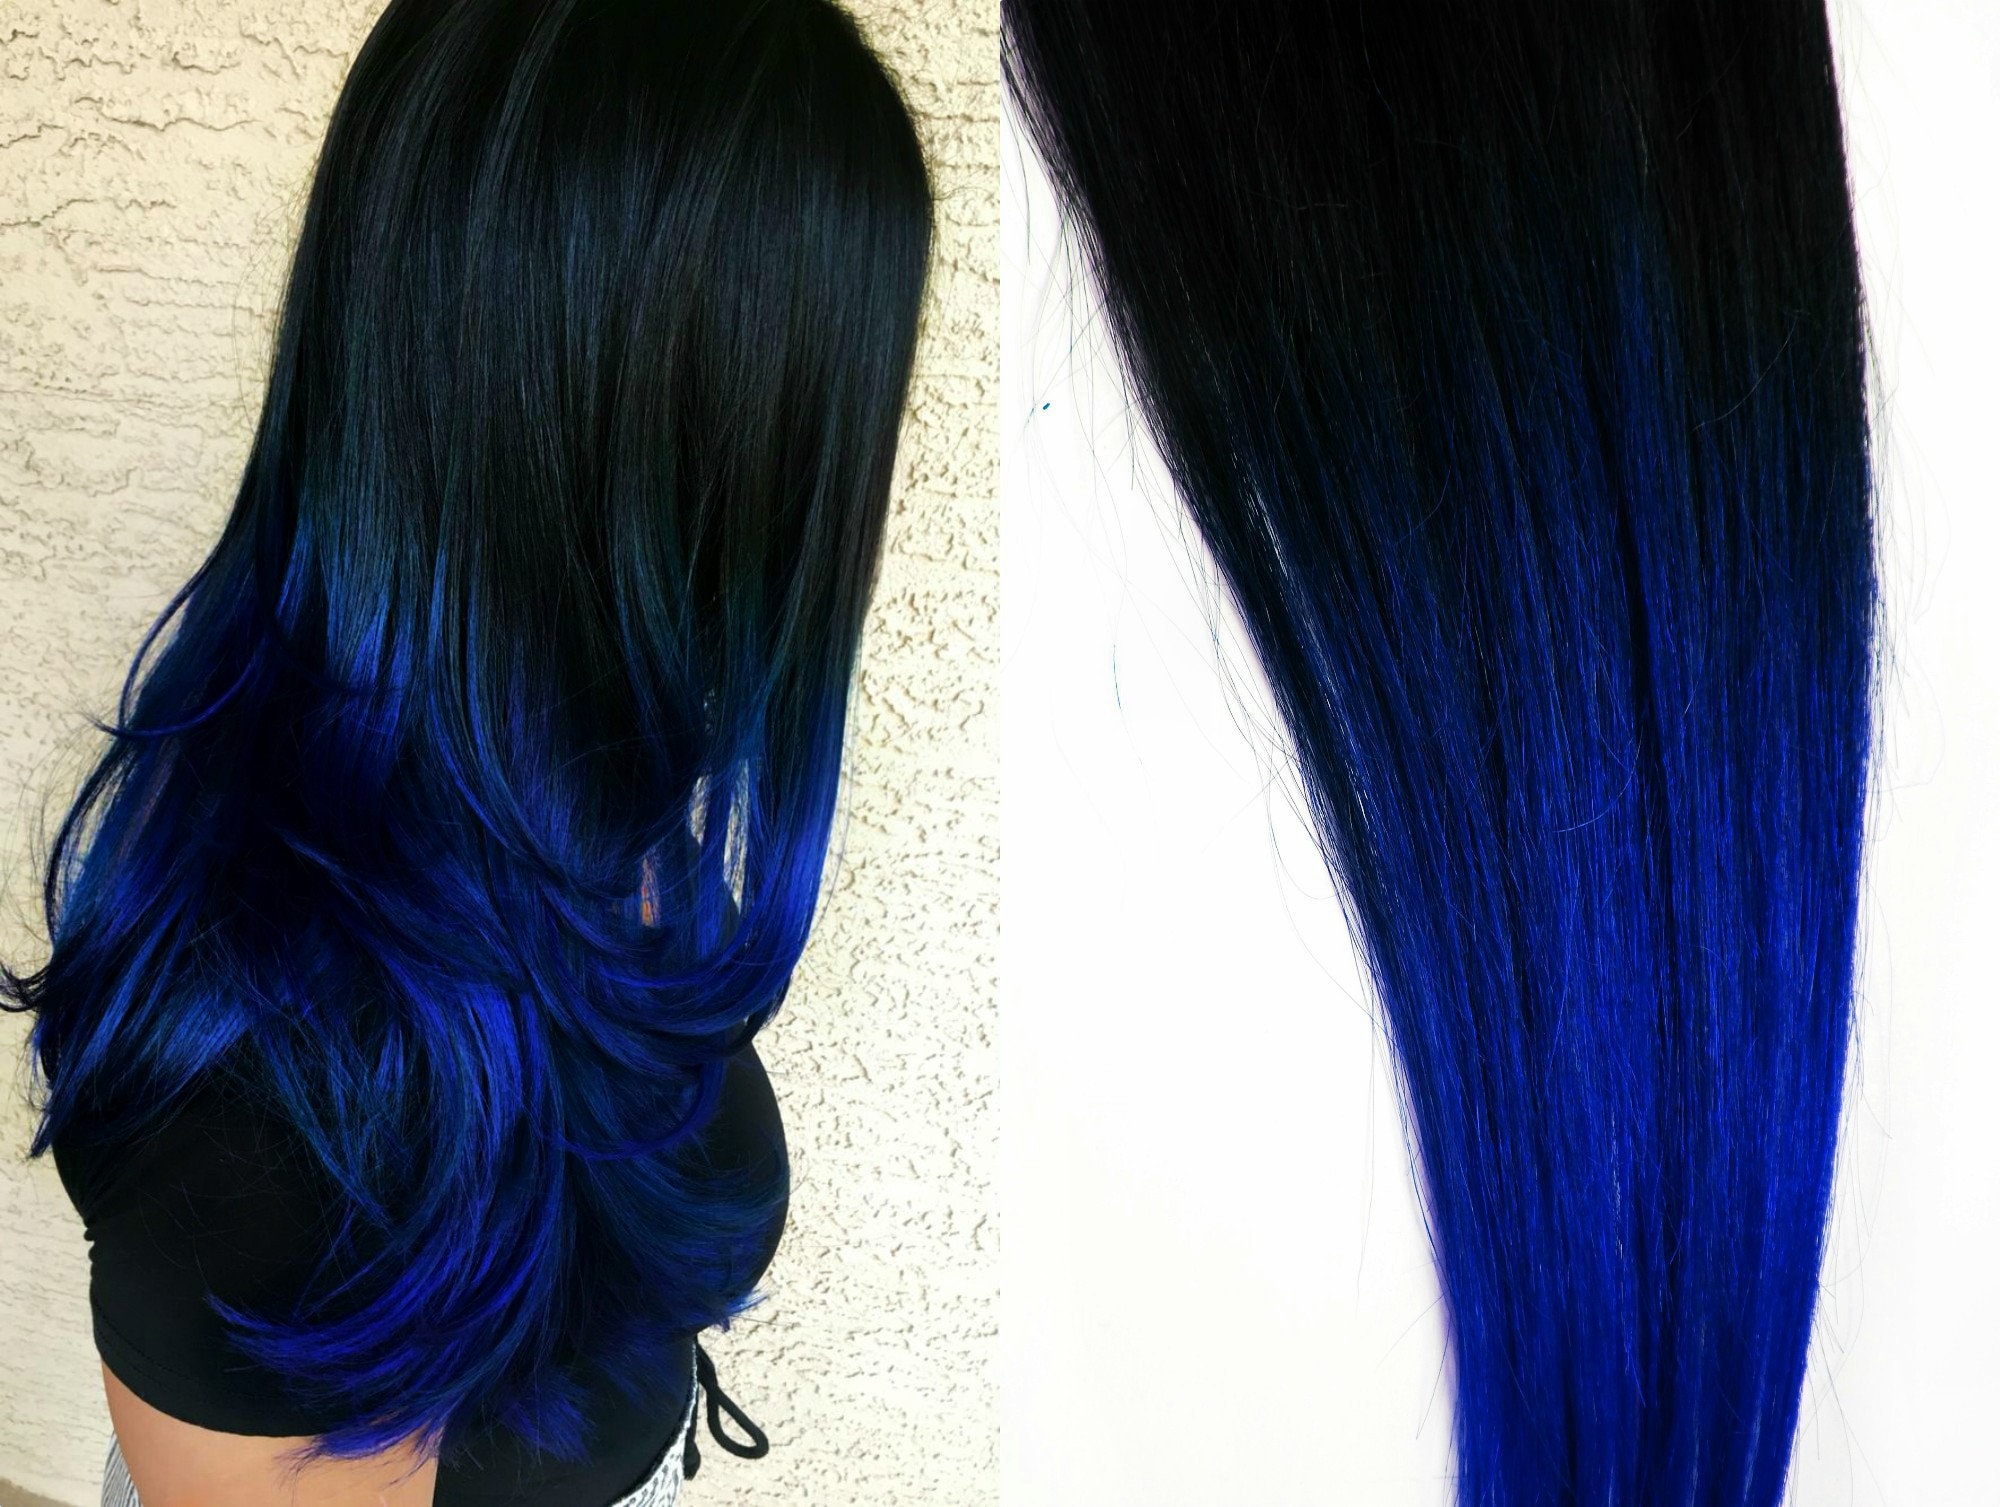 7. Royal Blue Human Hair Extensions - wide 7